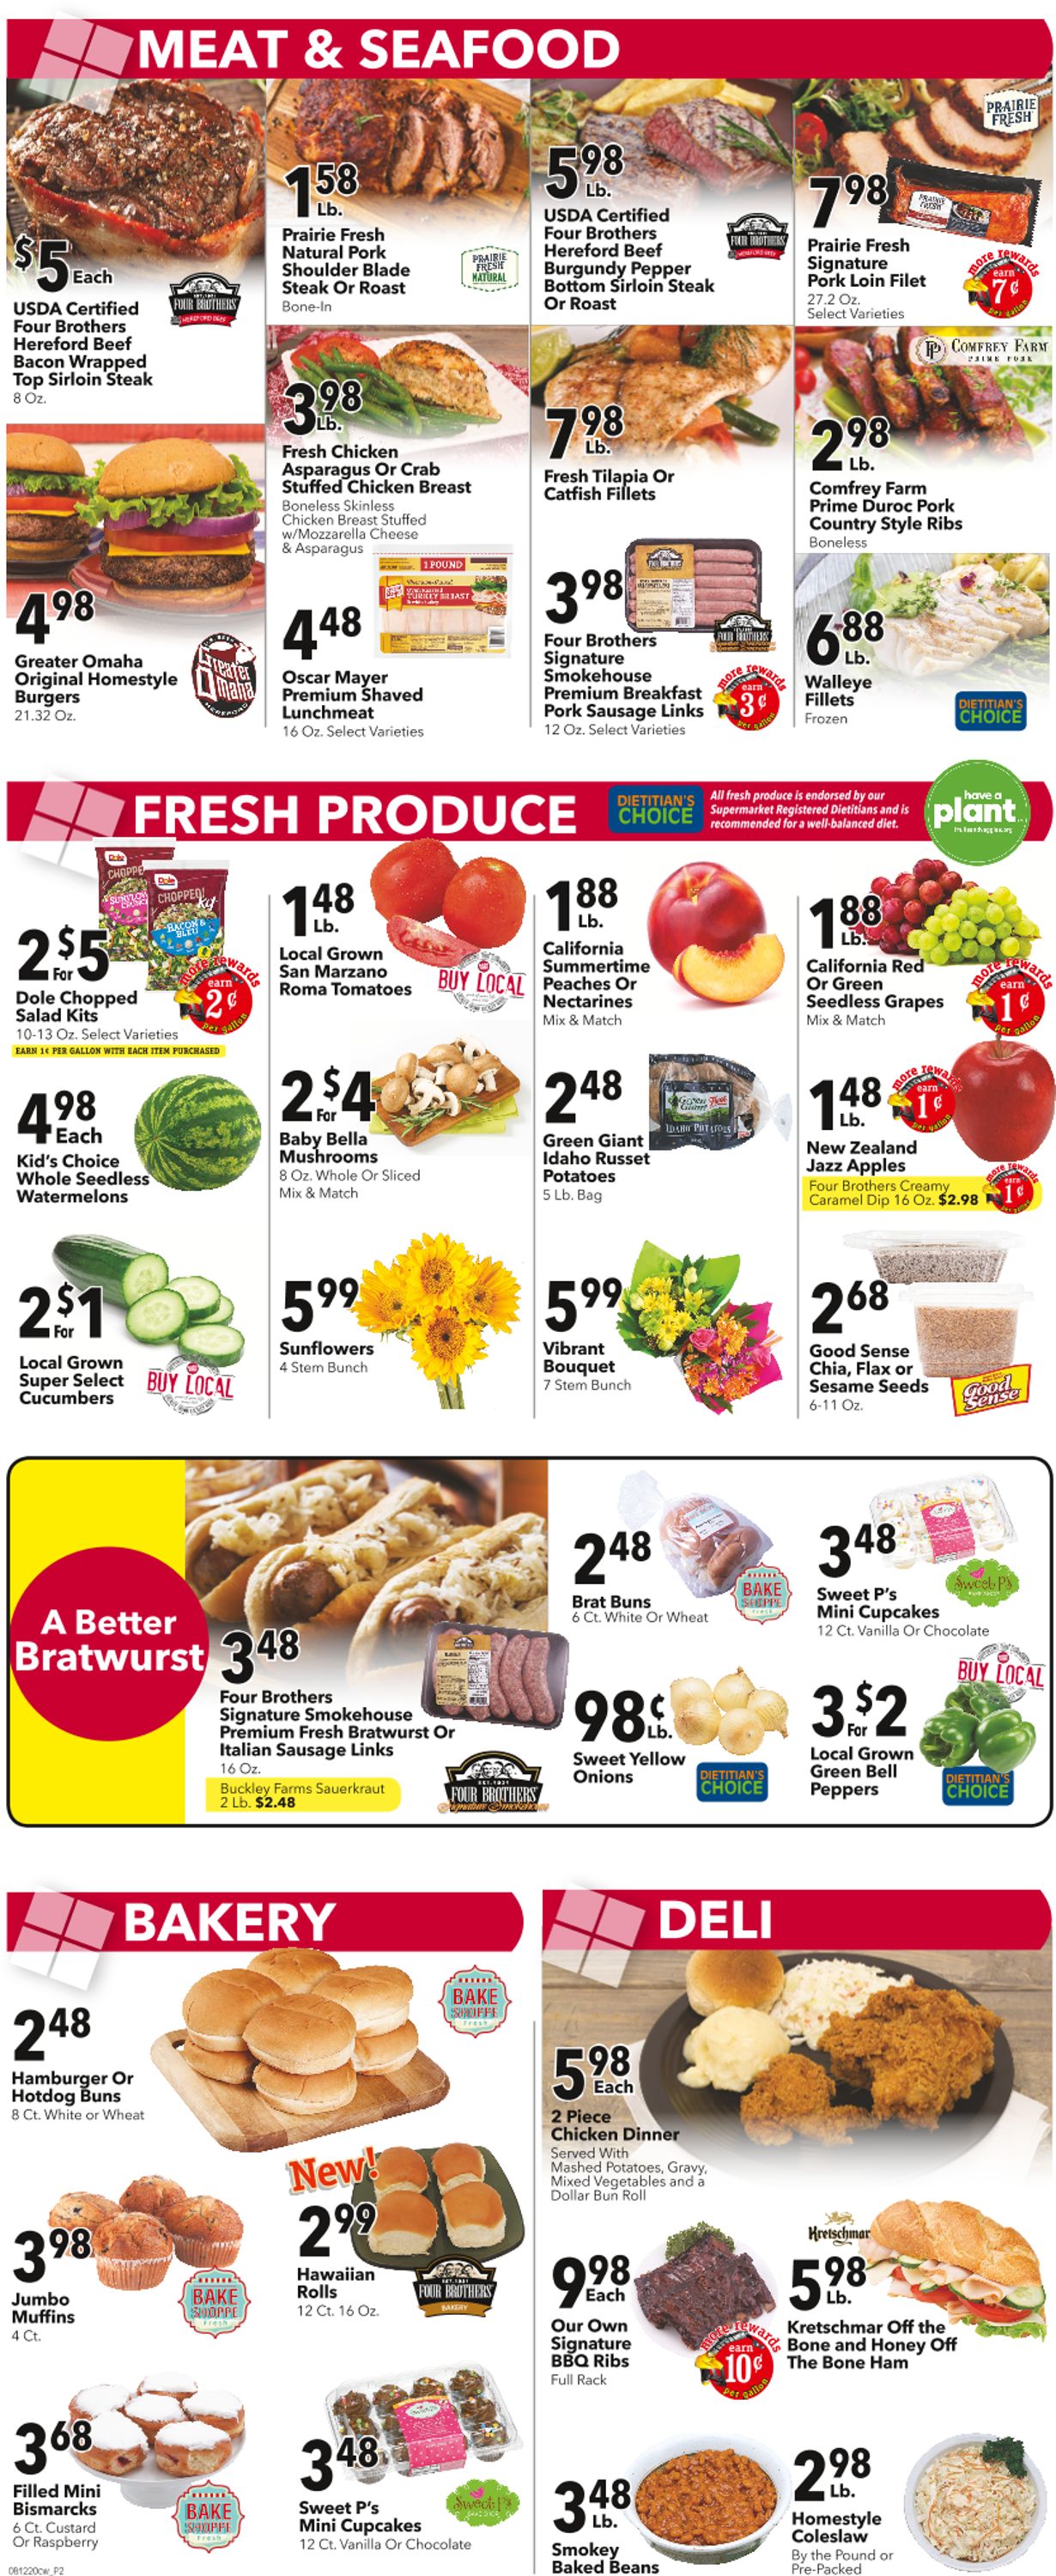 Cash Wise Weekly Ad Circular - valid 08/12-08/18/2020 (Page 2)